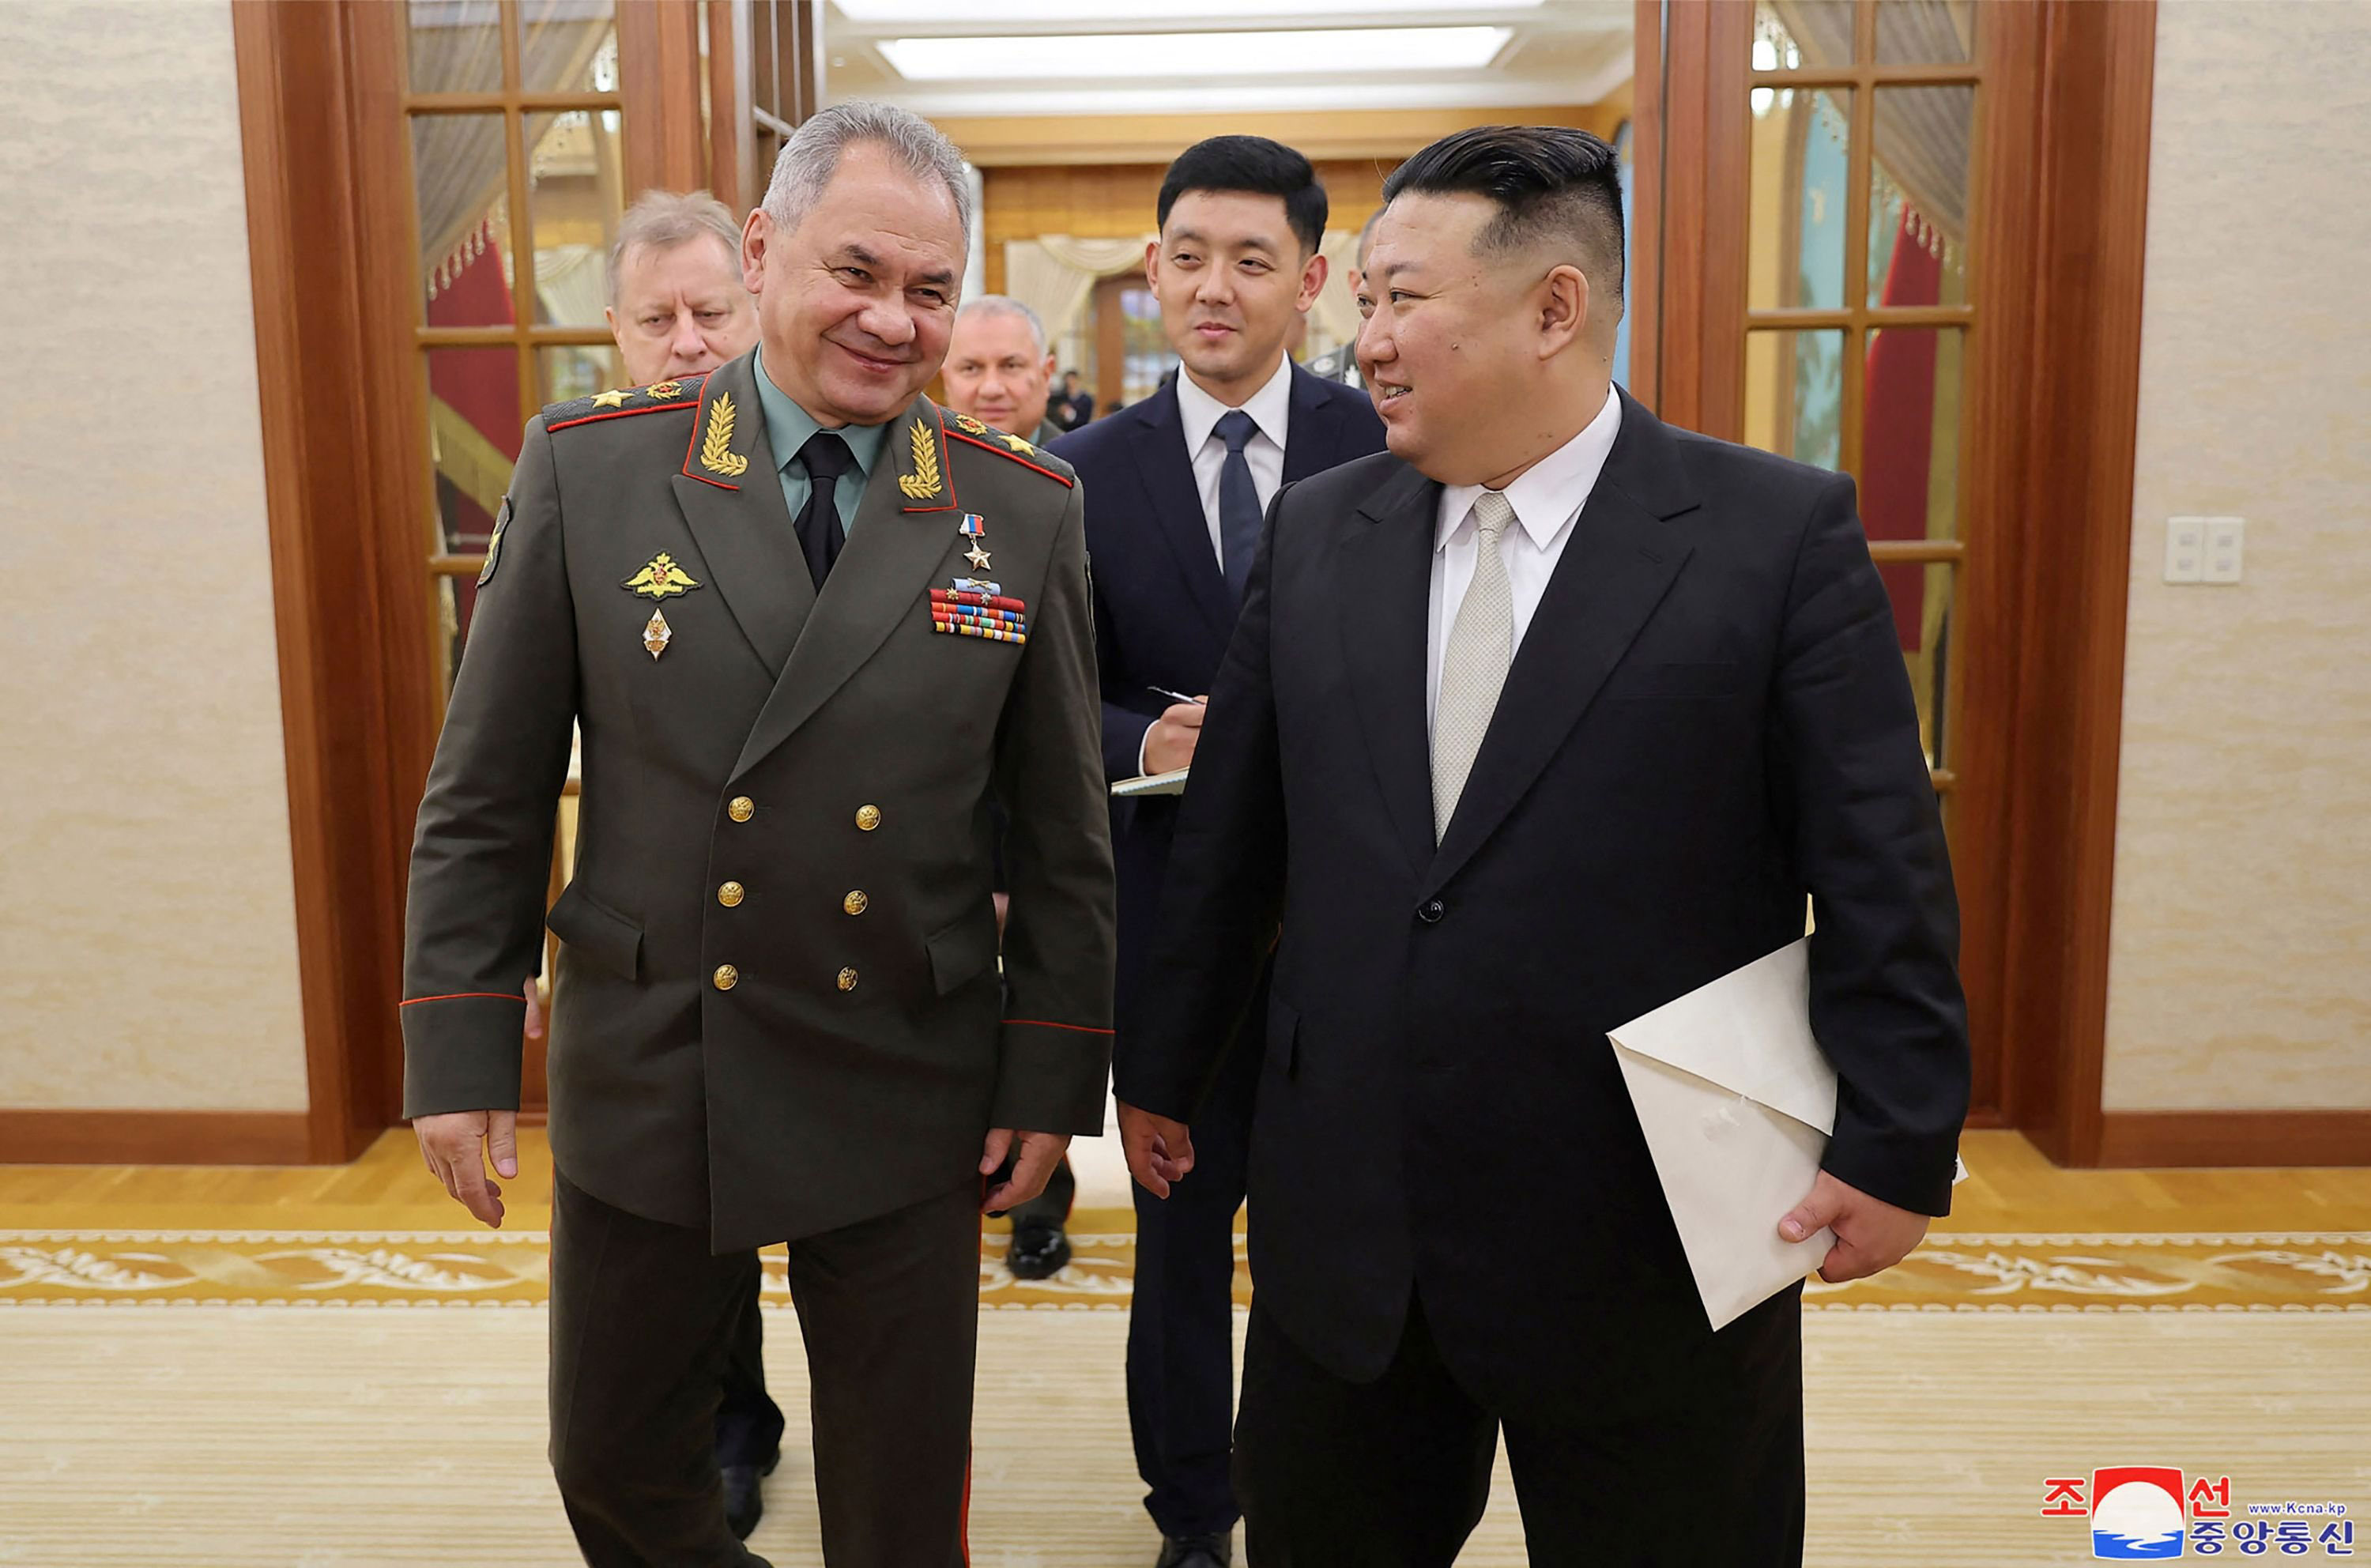 Russian Defence Minister Sergei Shoigu, left, and North Korean leader Kim Jong Un walk together in Pyongyang on Wednesday.